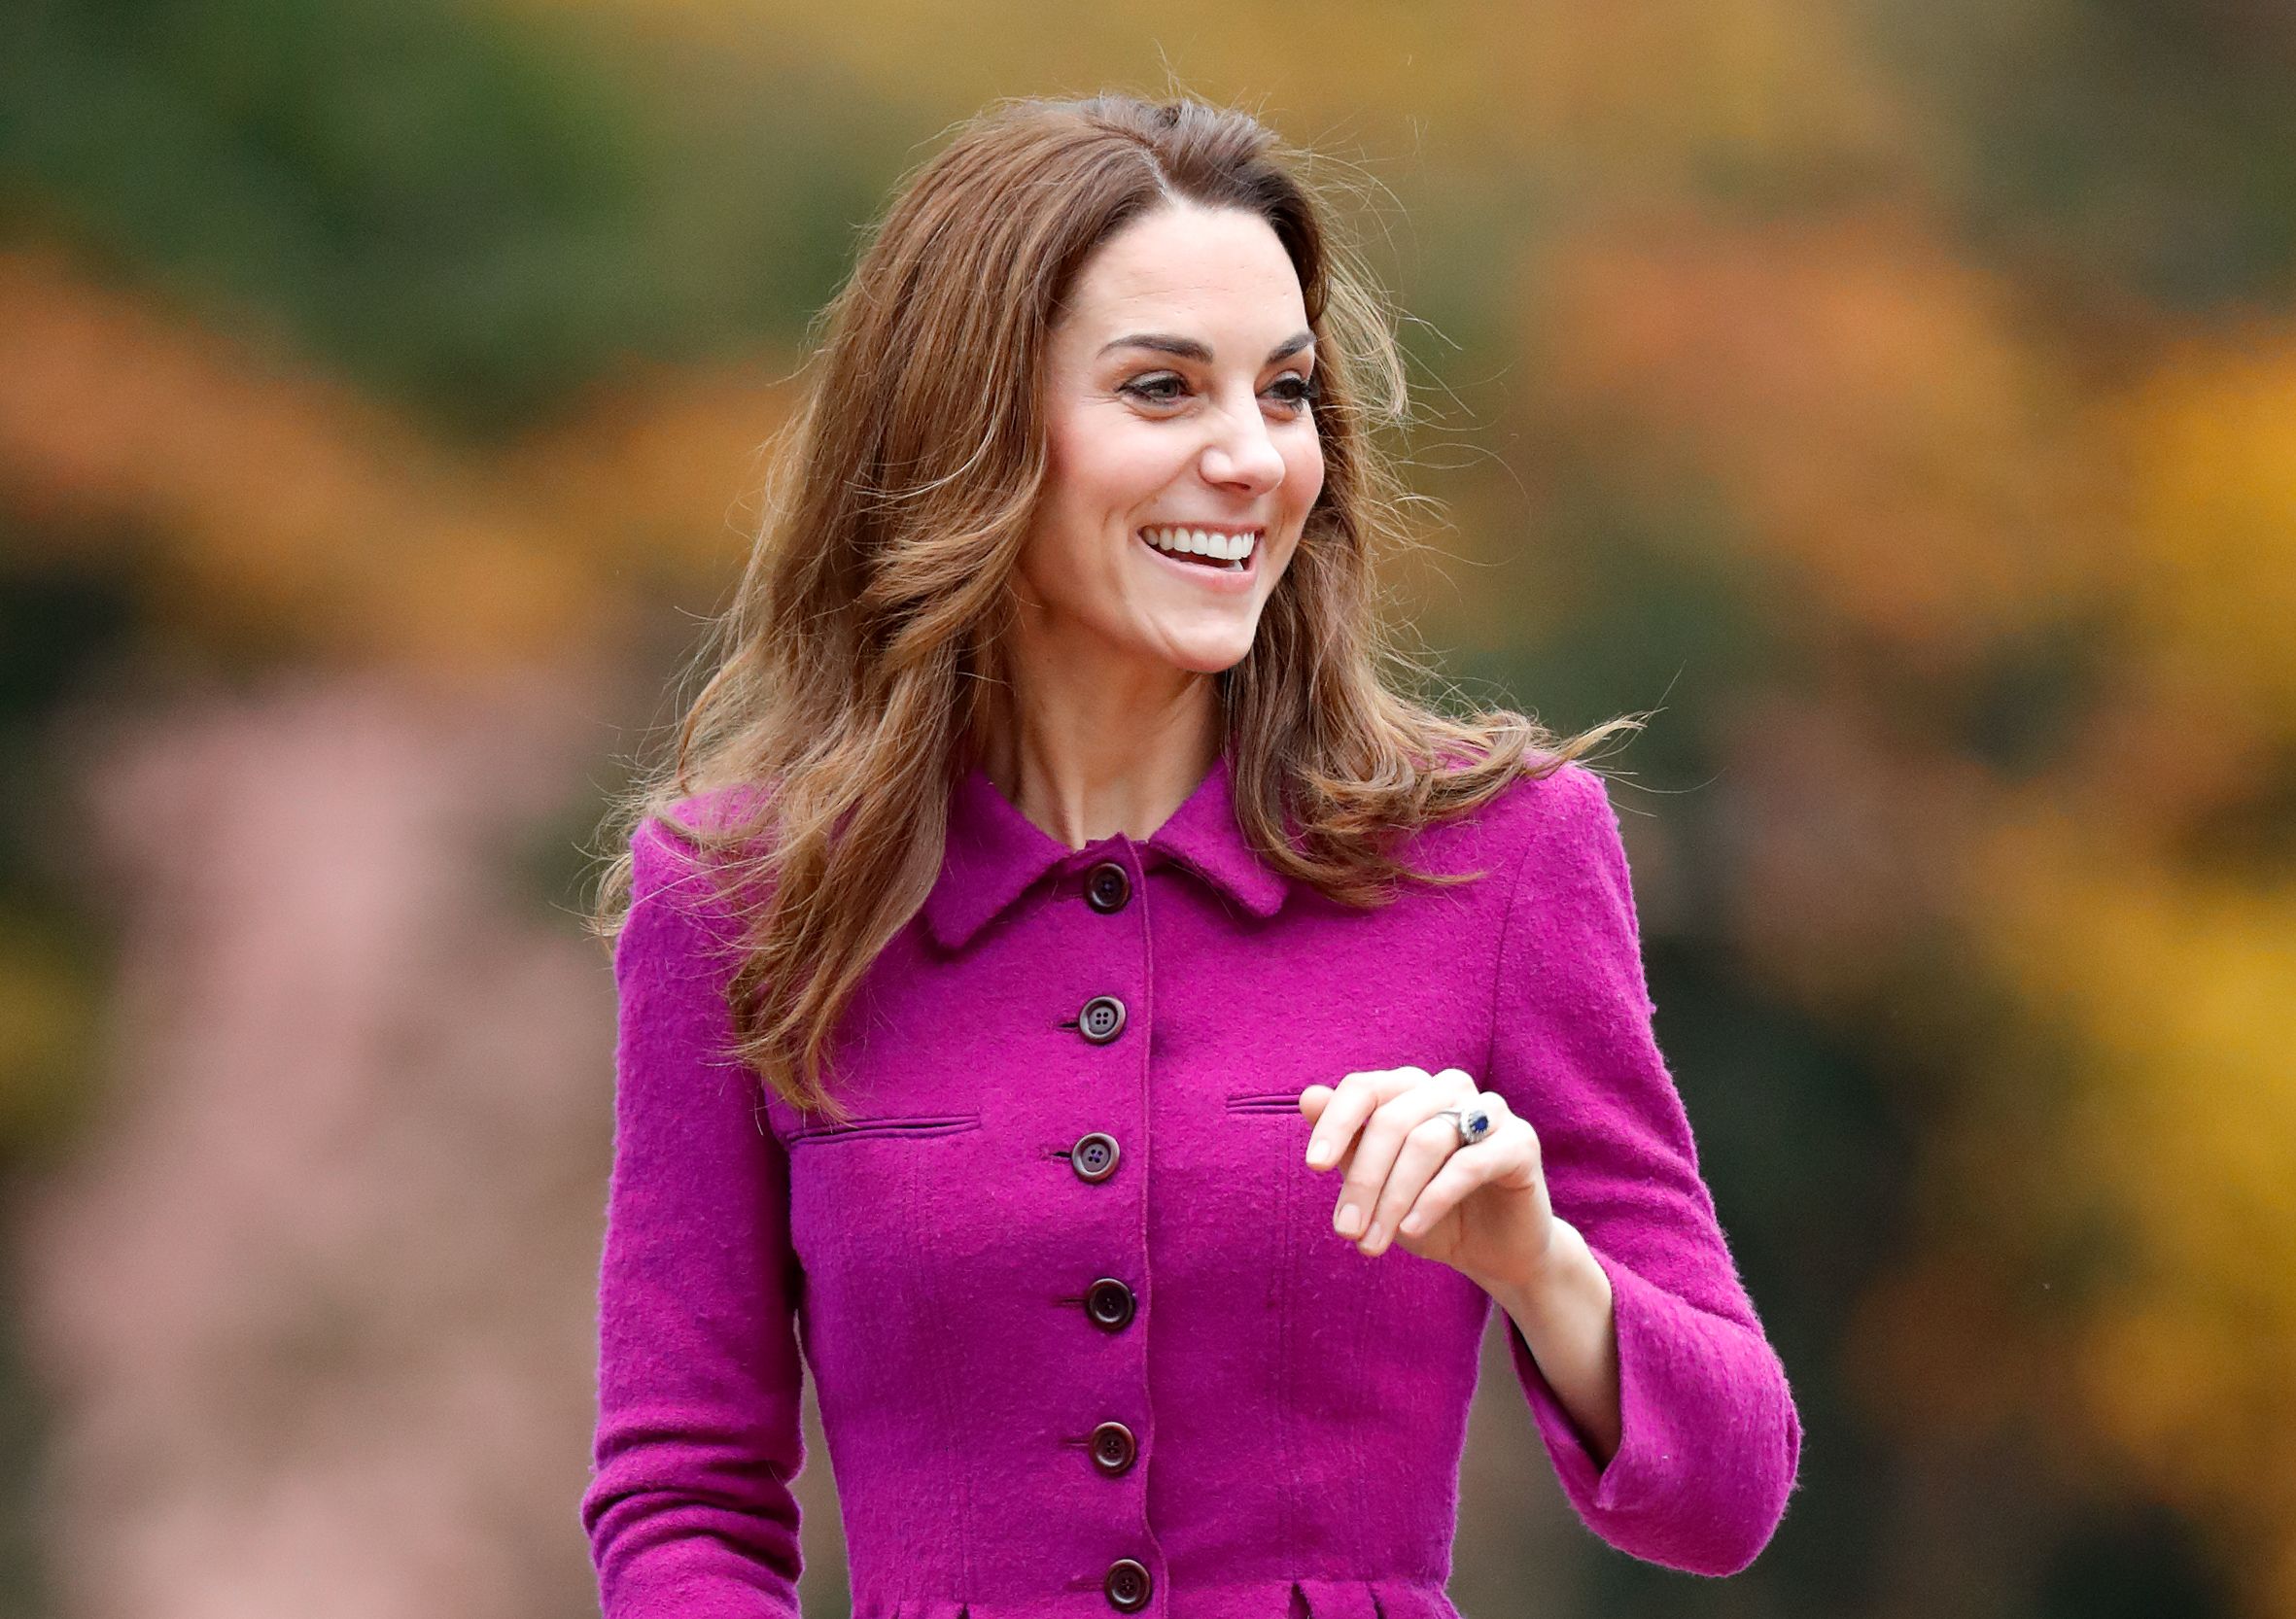 Kate Middleton arrives to open 'The Nook' Children's Hospice on November 15, 2019 | Photo: Getty Images